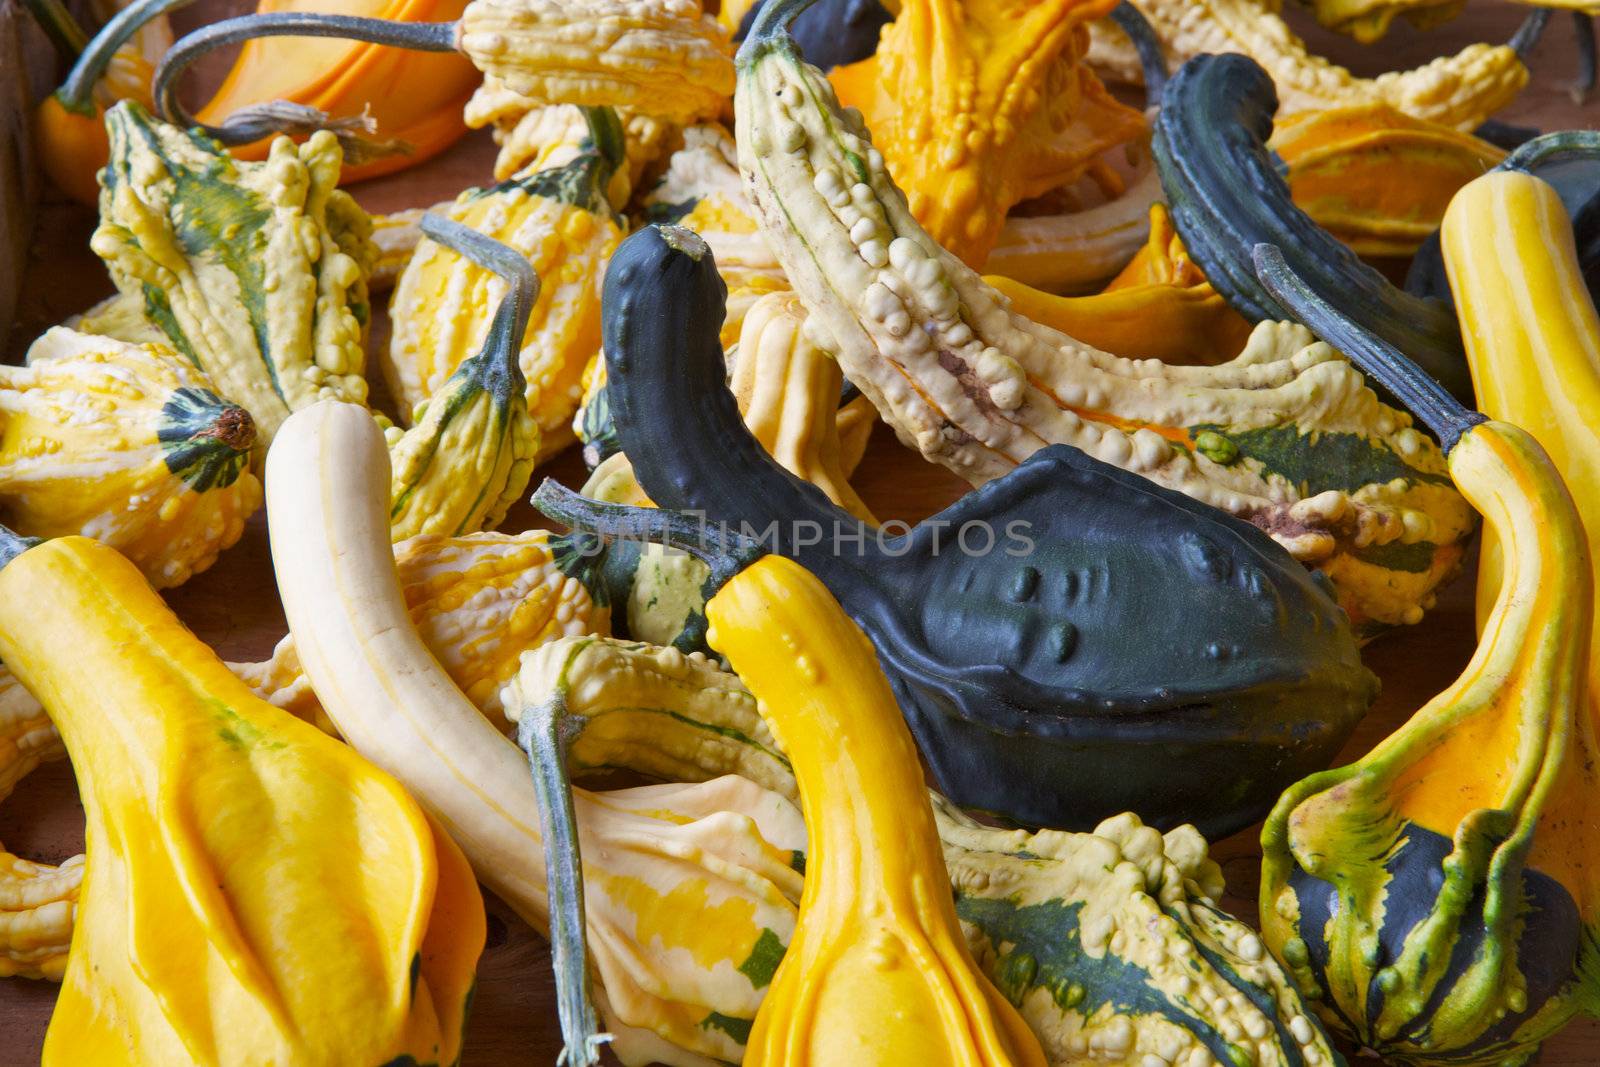 Pile of a variety of green yellow white and orange crook neck pebble skin squash